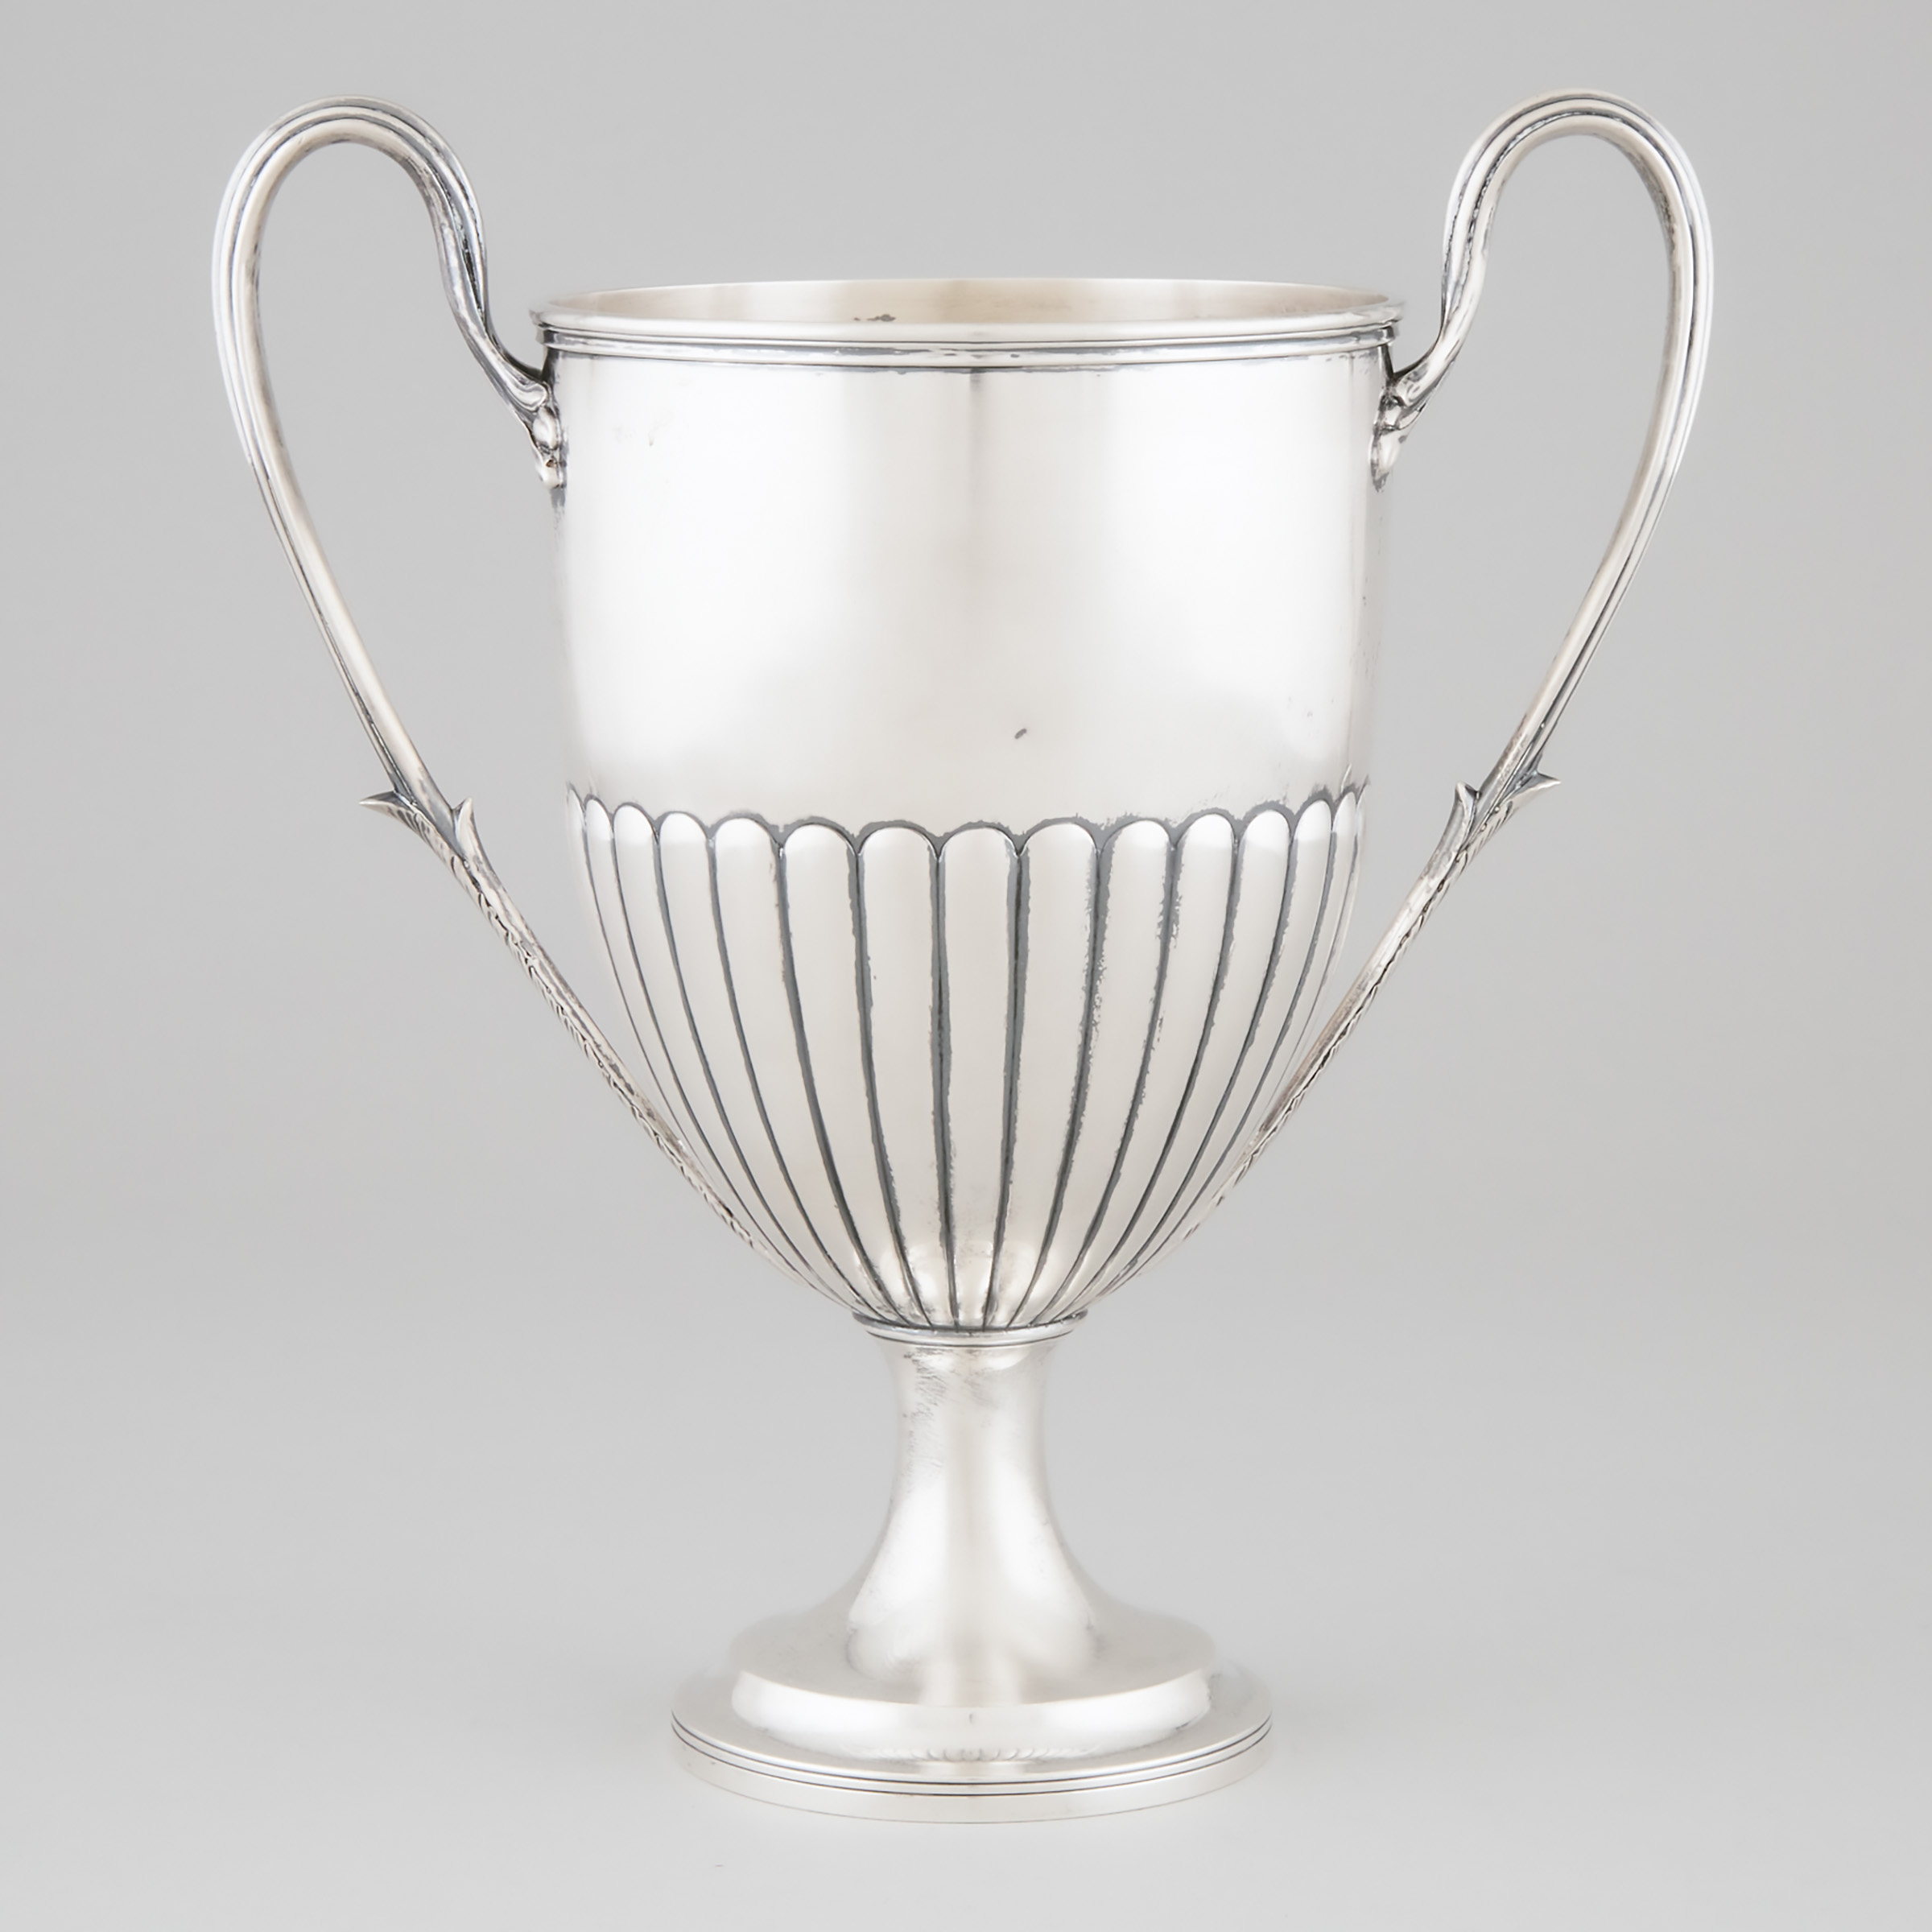 Late Victorian Silver Two-Handled Cup, F.B. Thomas & Co., London, 1897